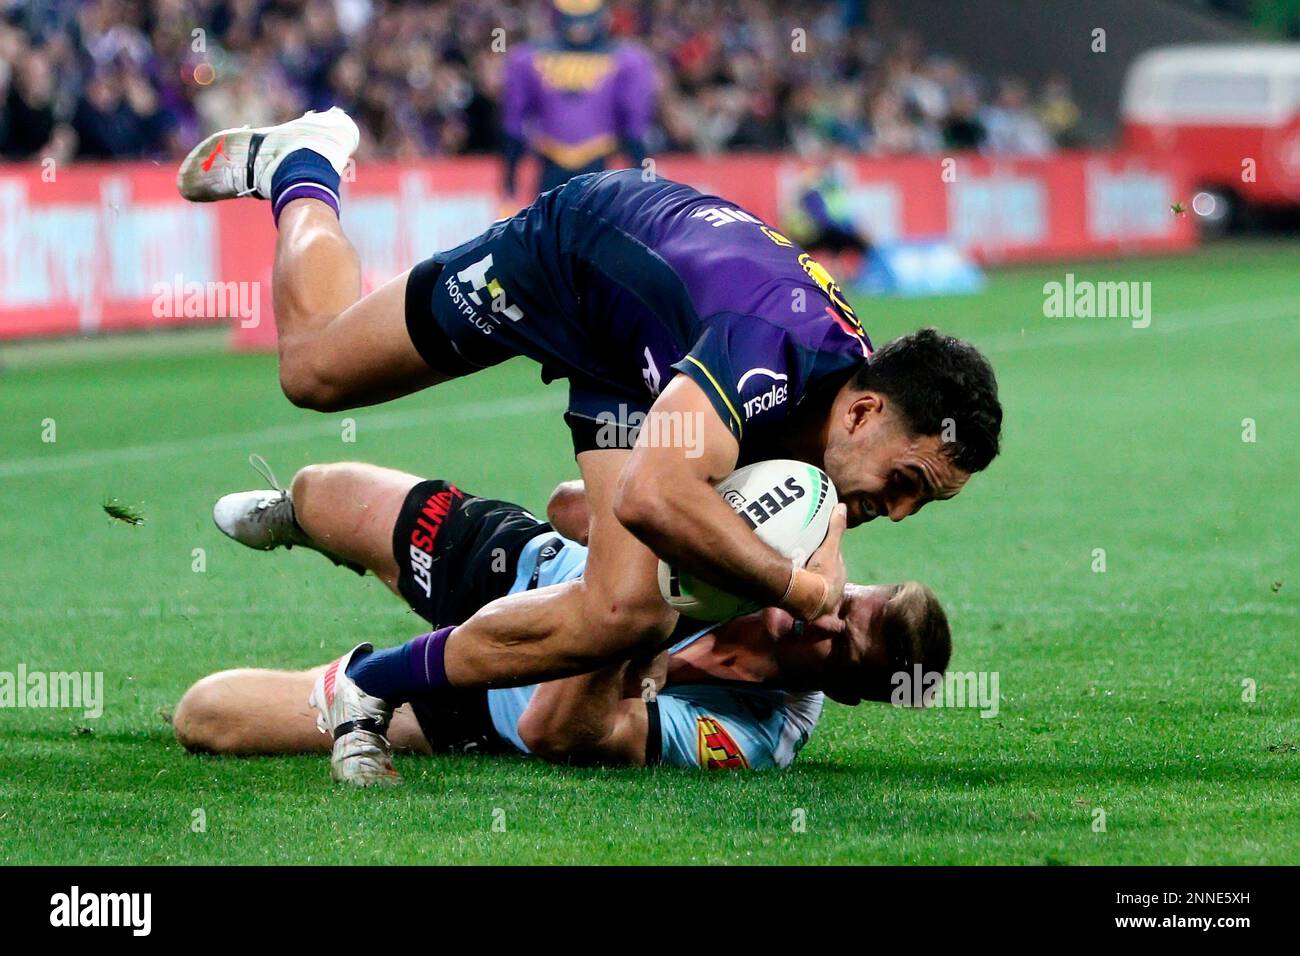 Reimis Smith of the Storm scores a try during the NRL Round 12 match  between the Redcliffe Dolphins and the Melbourne Storm at Suncorp Stadium  in Brisbane, Saturday, May 20, 2023. (AAP